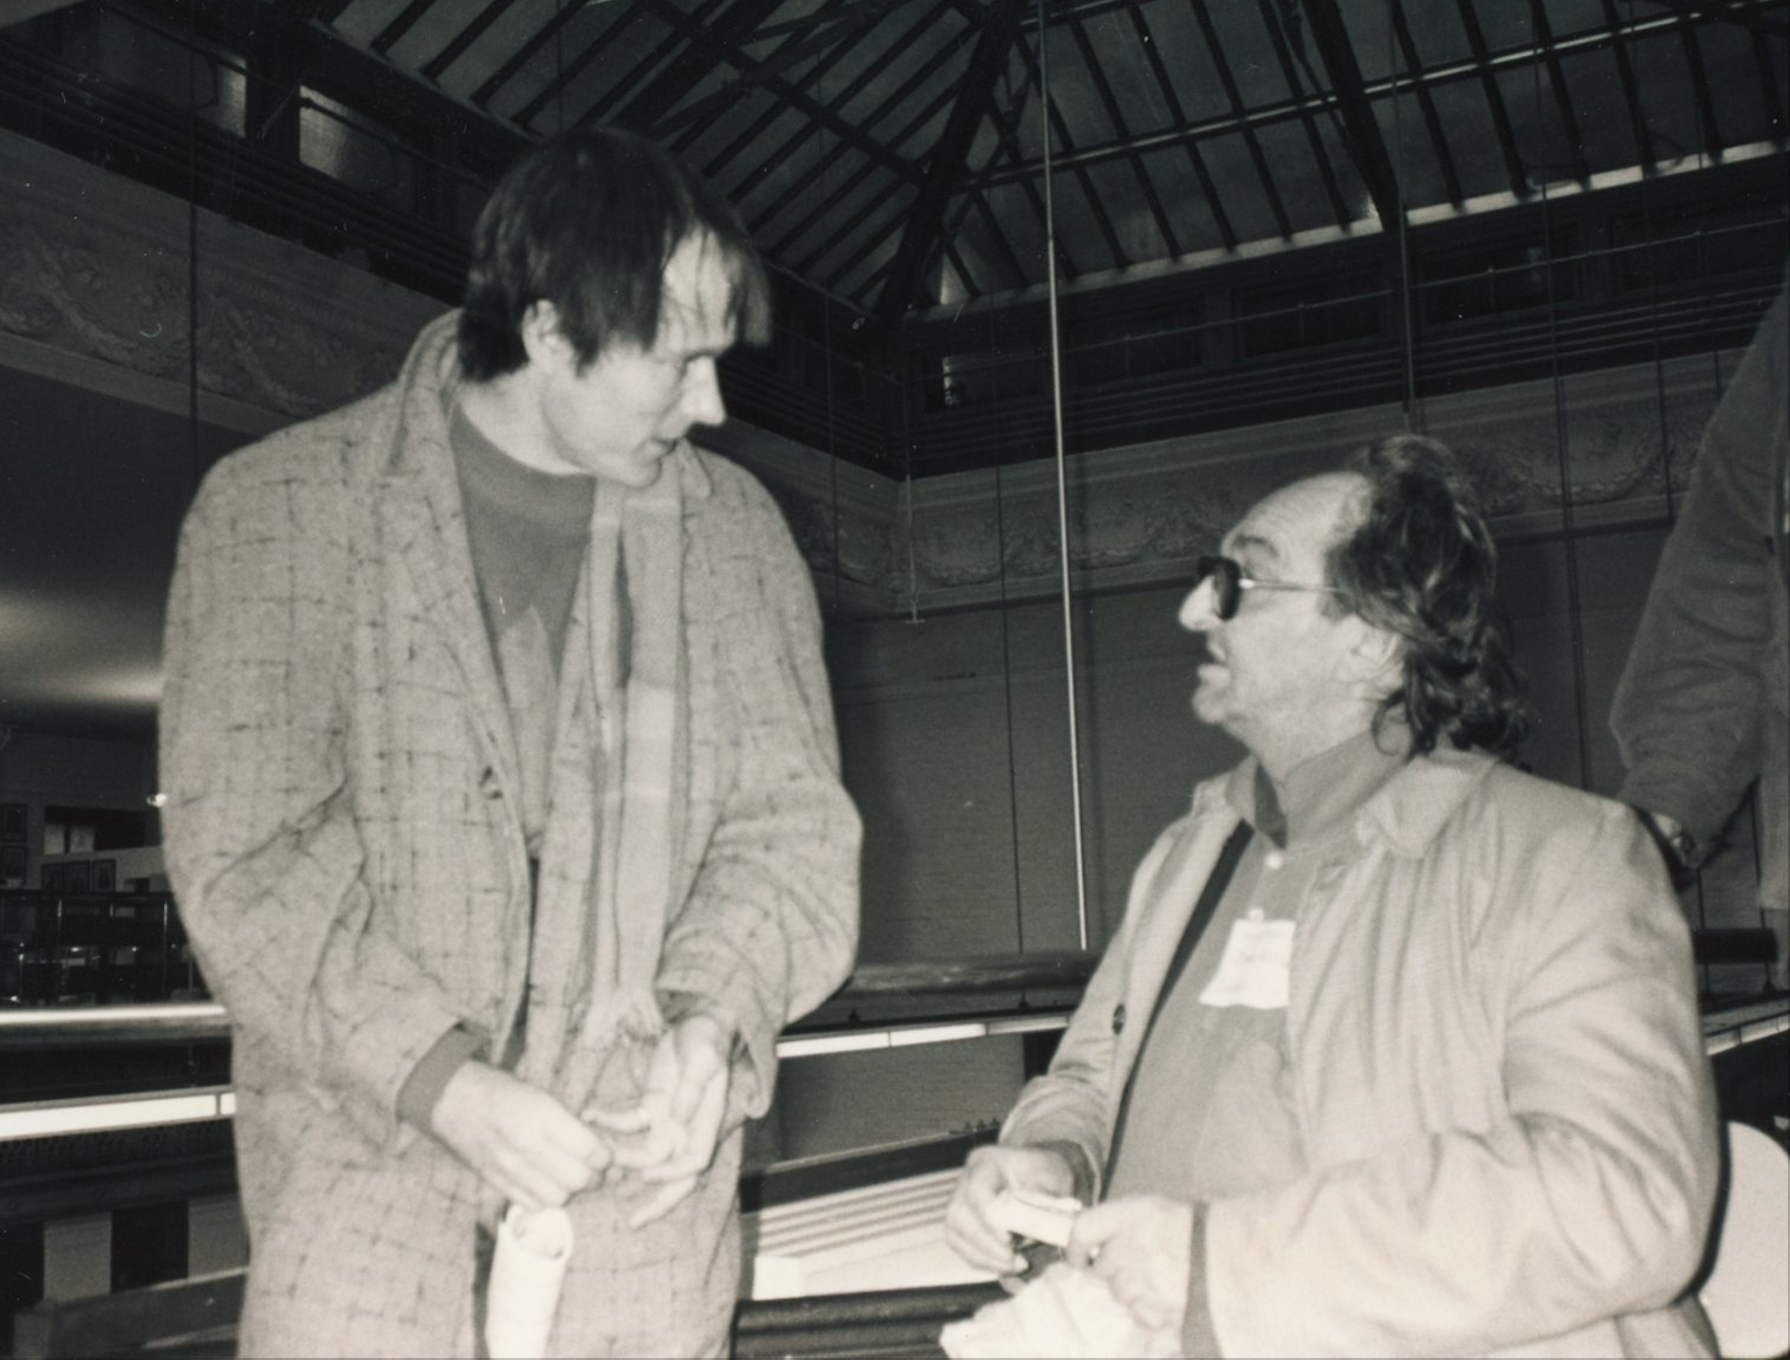 Simon Pettet with John Wieners – photo by Allen Ginsberg